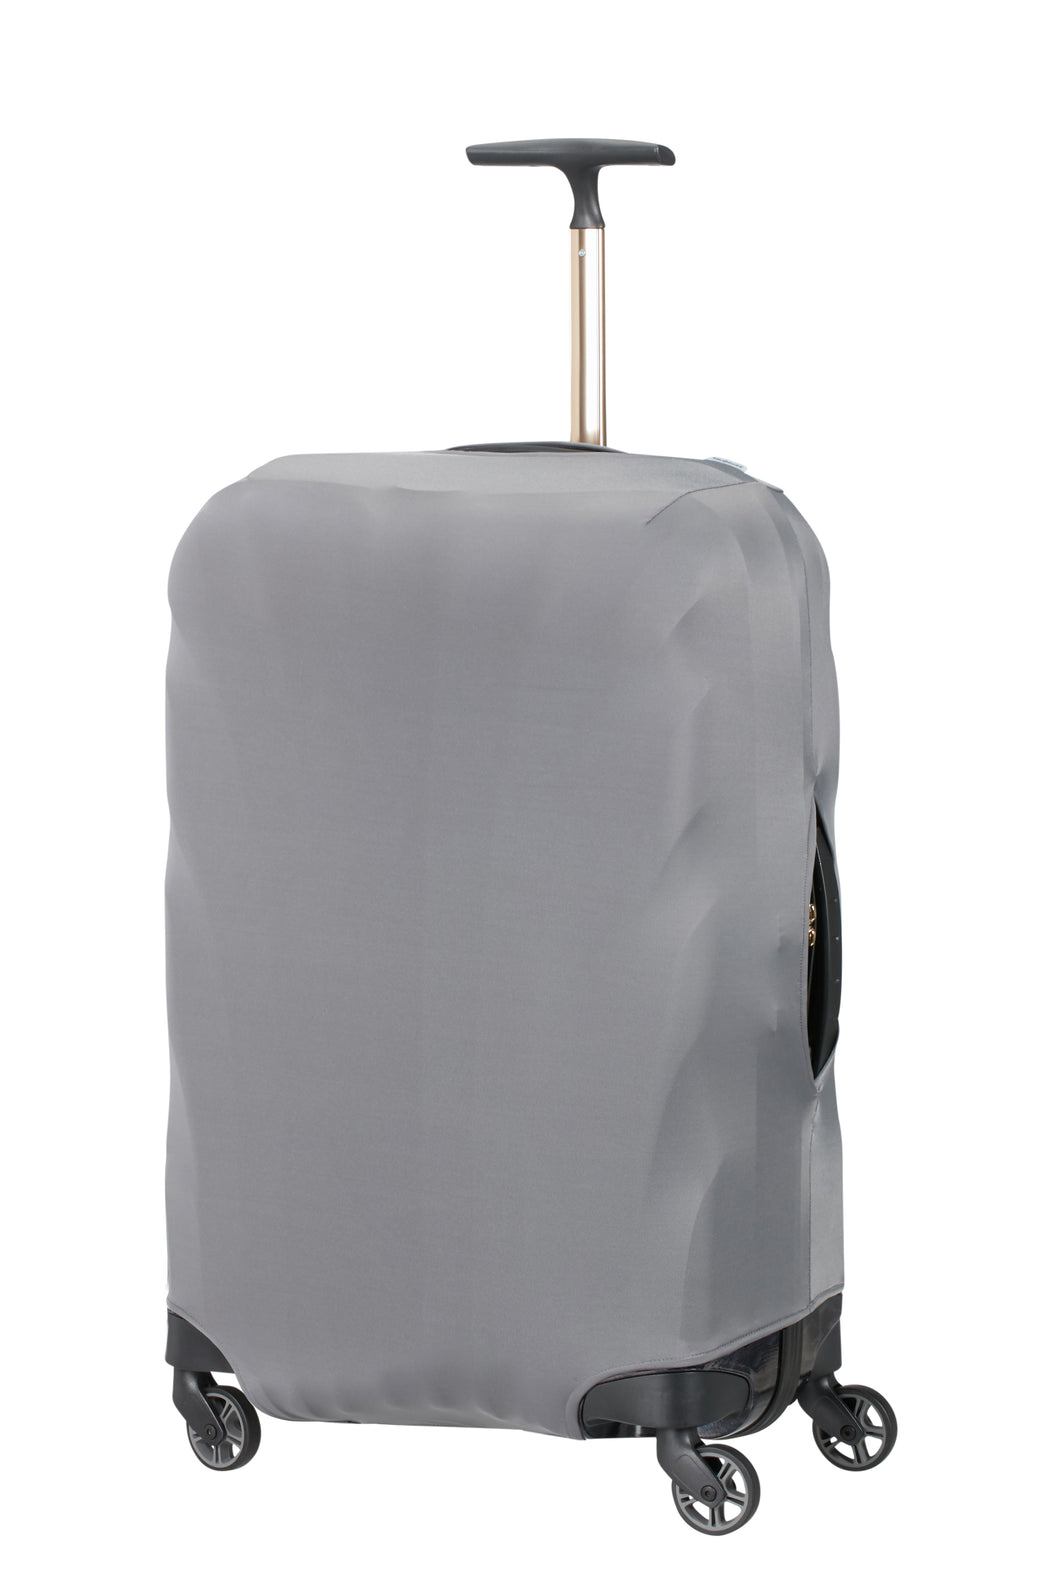 TRAVEL ACCESSORIES Lycra Luggage Cover M